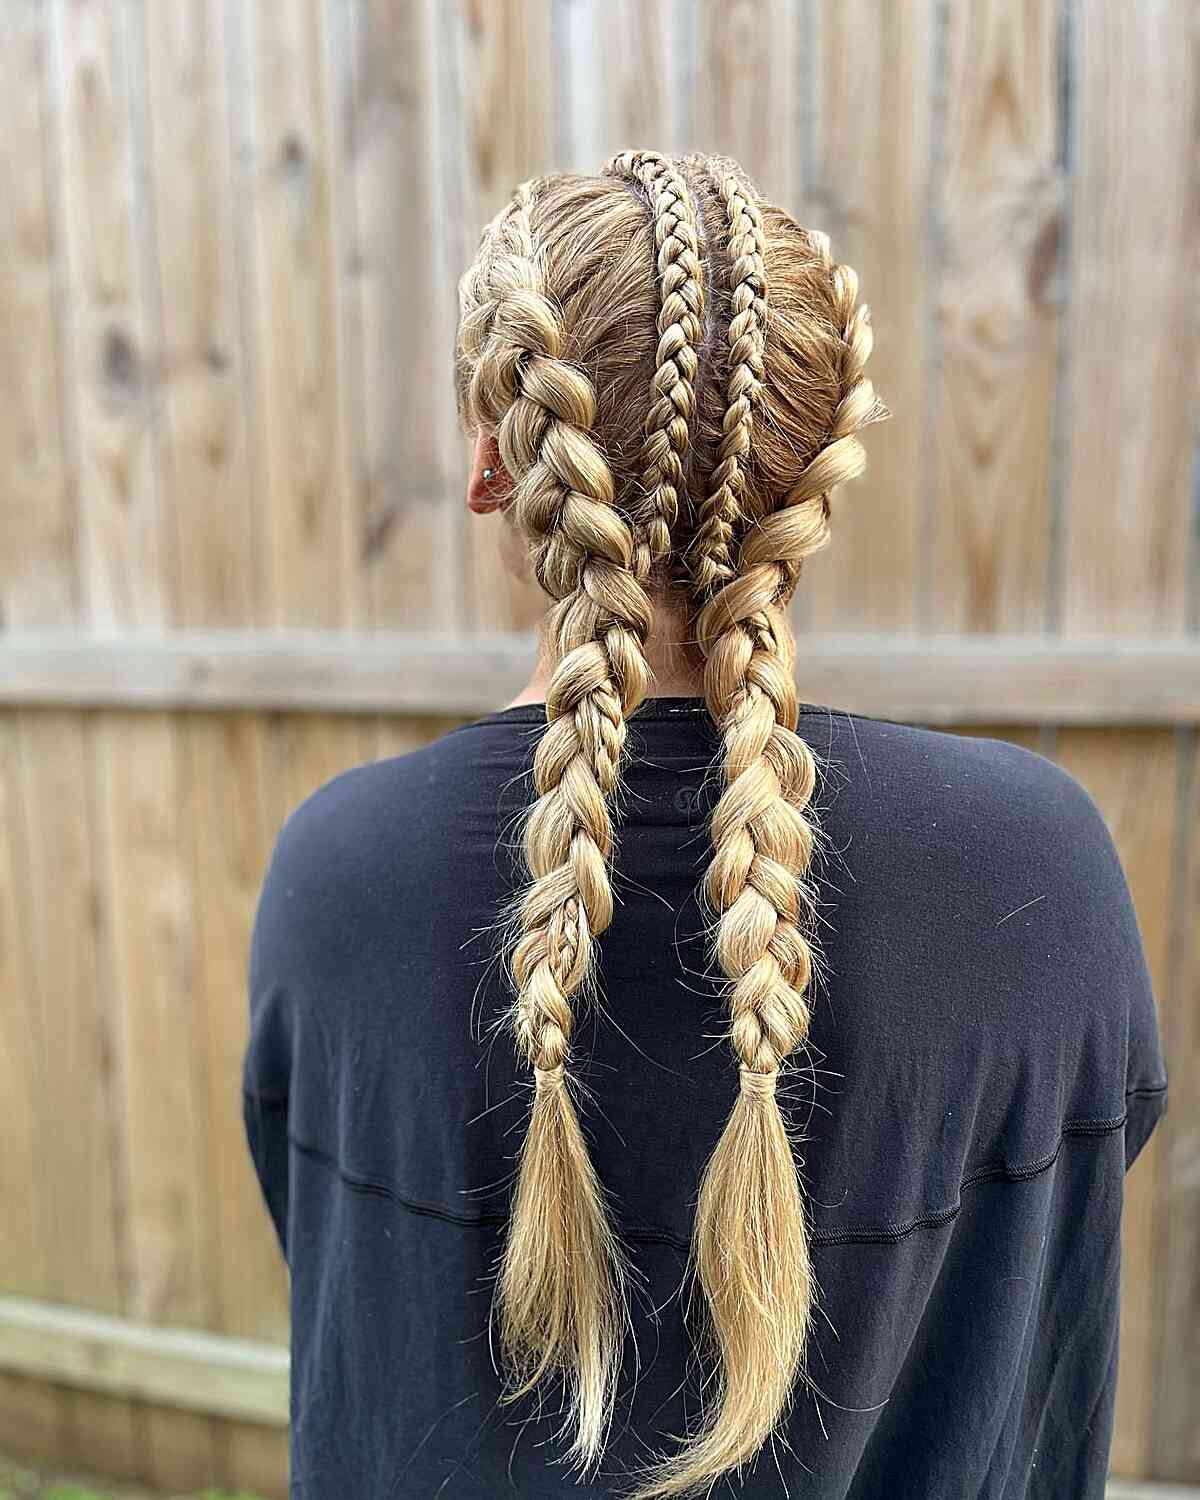 Longer Blonde Hair with Tight Braids and Pigtails